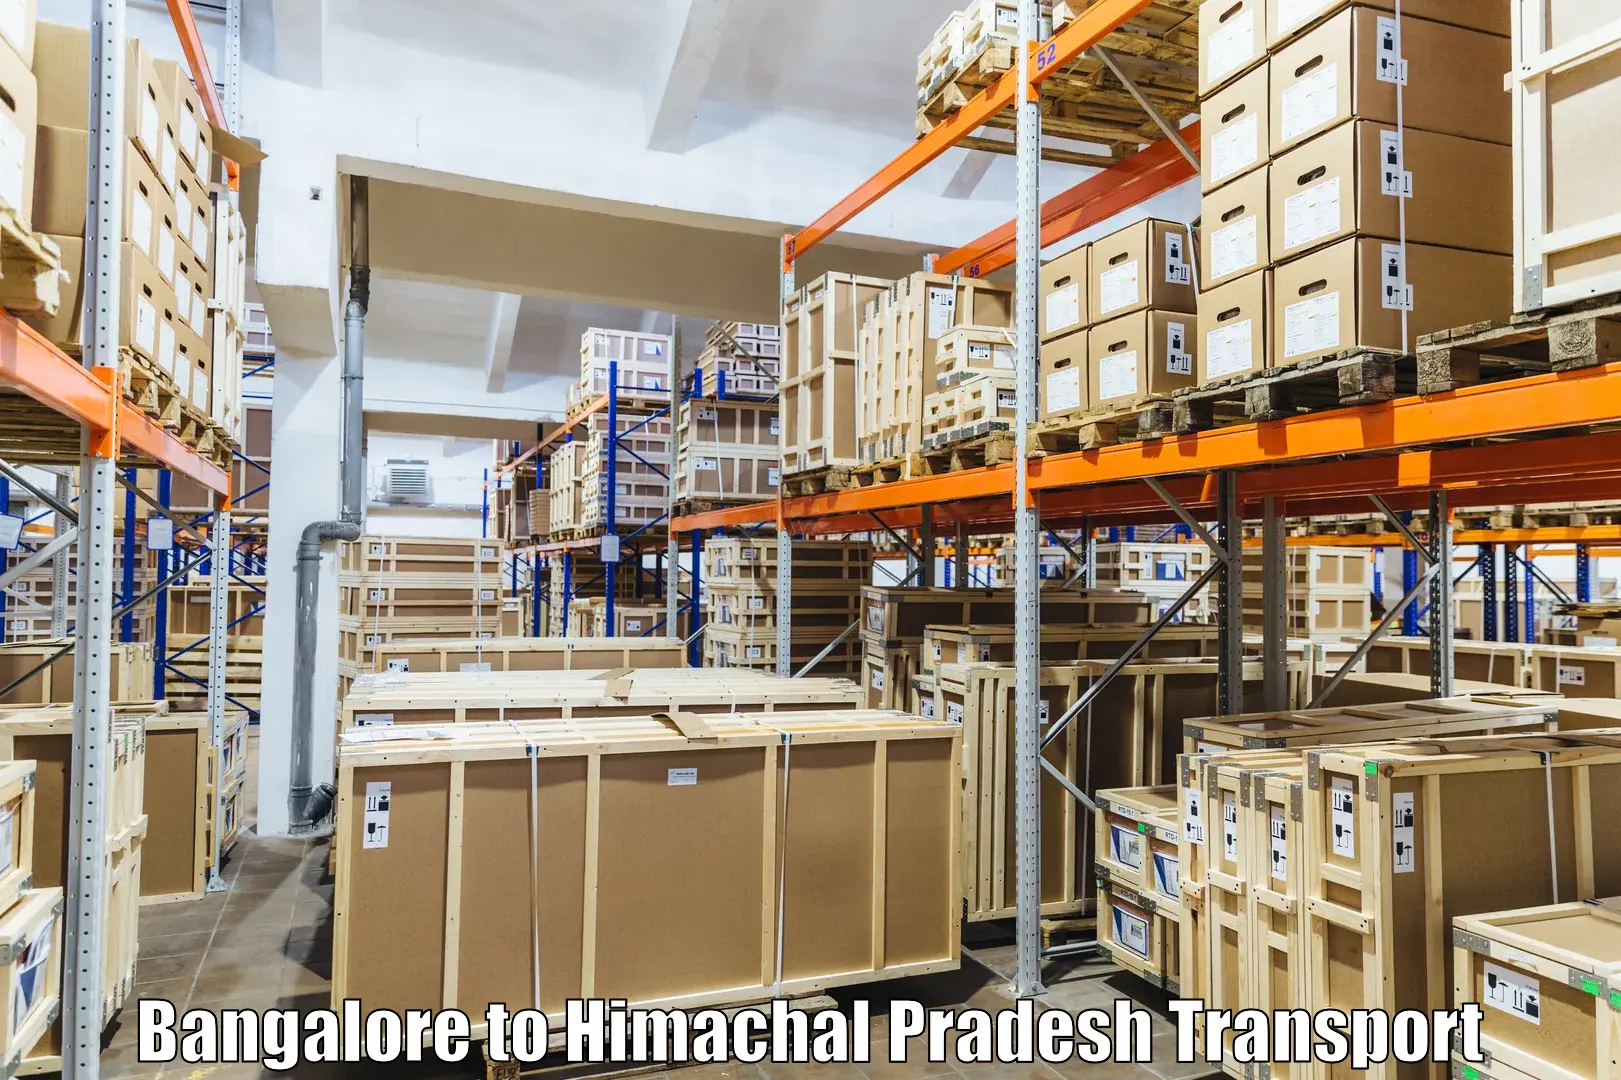 Parcel transport services in Bangalore to Sundla